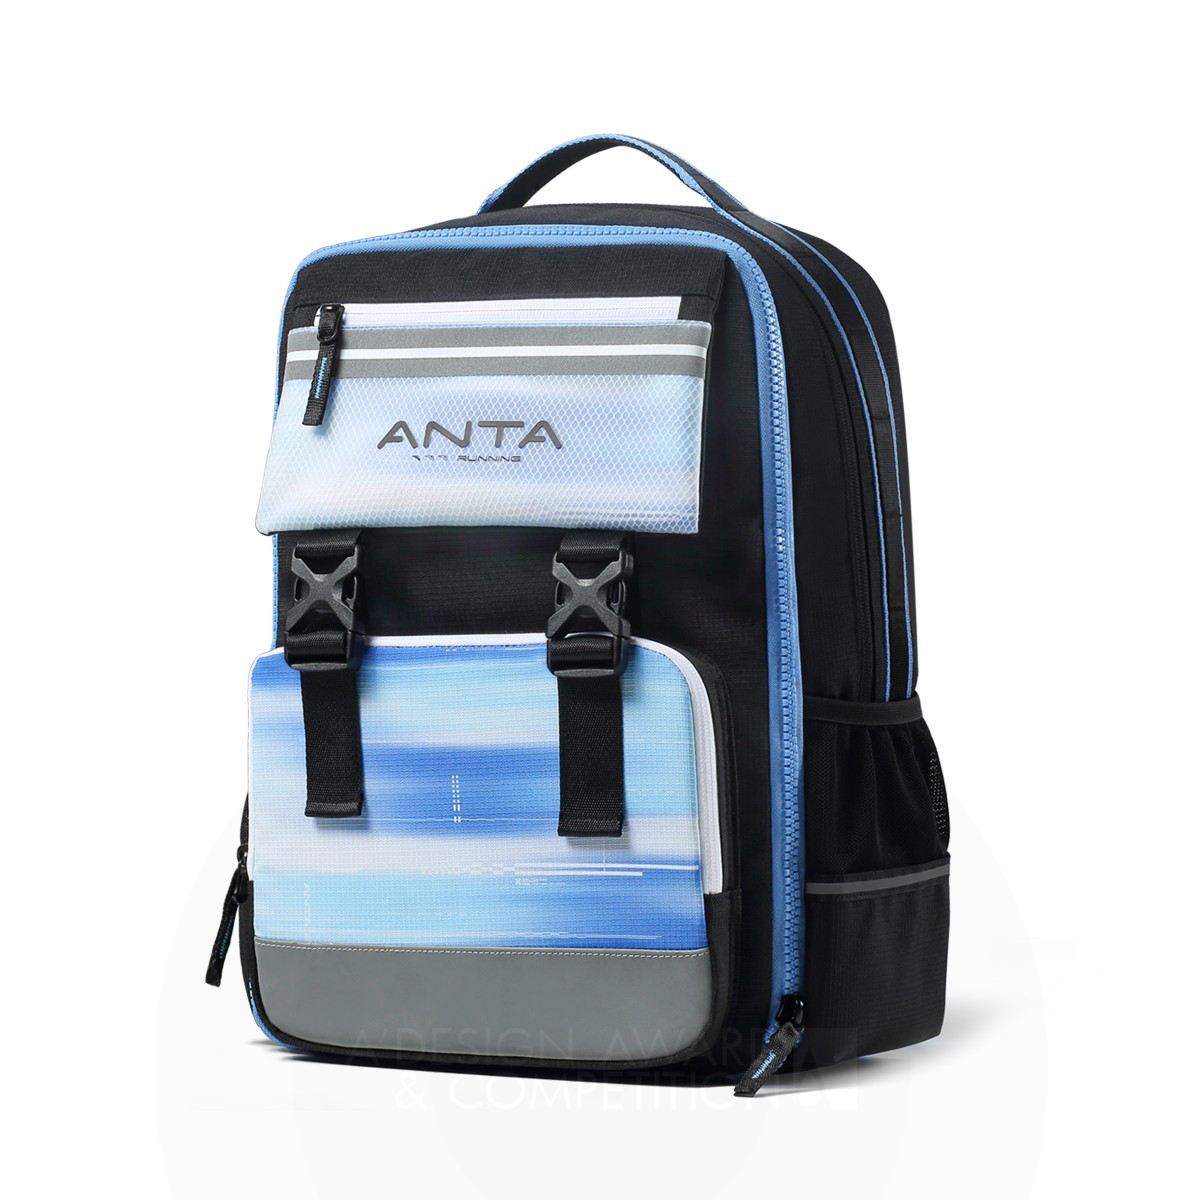 Balance and Decompression Version 2 Schoolbag by Anta Sports Products Group Co., Ltd Iron Baby, Kids' and Children's Products Design Award Winner 2023 